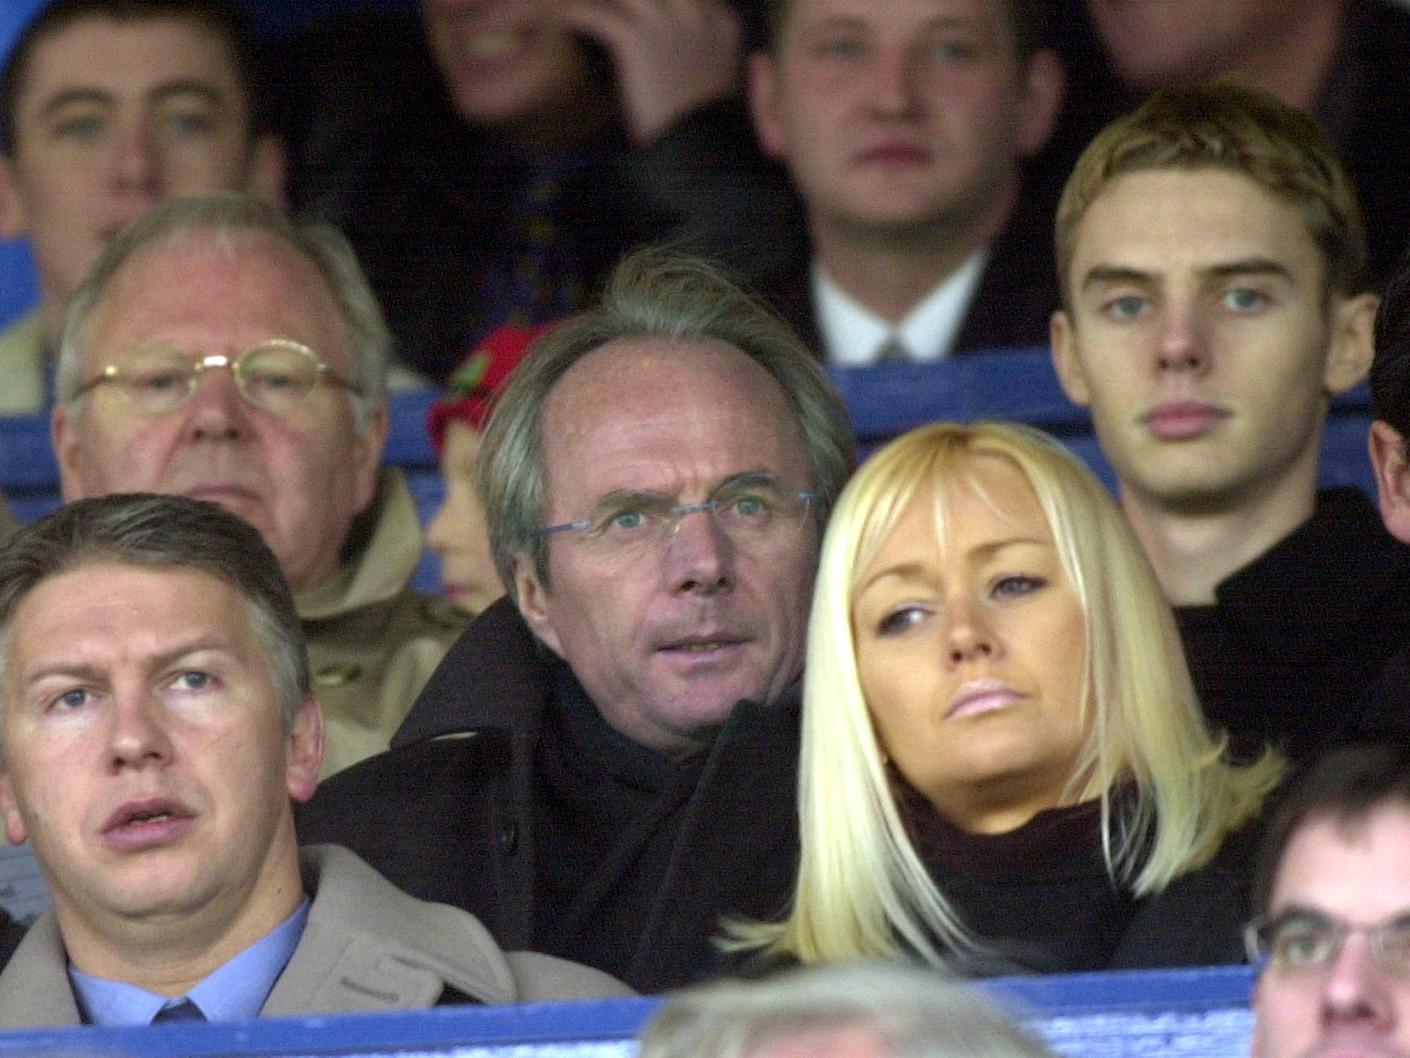 Newly-appointed Three Lions coach Sven Goran Eriksson was at Elland Road to watch Leeds United's FA Cup fourth round clash against Liverpool. The game ended 0-0.